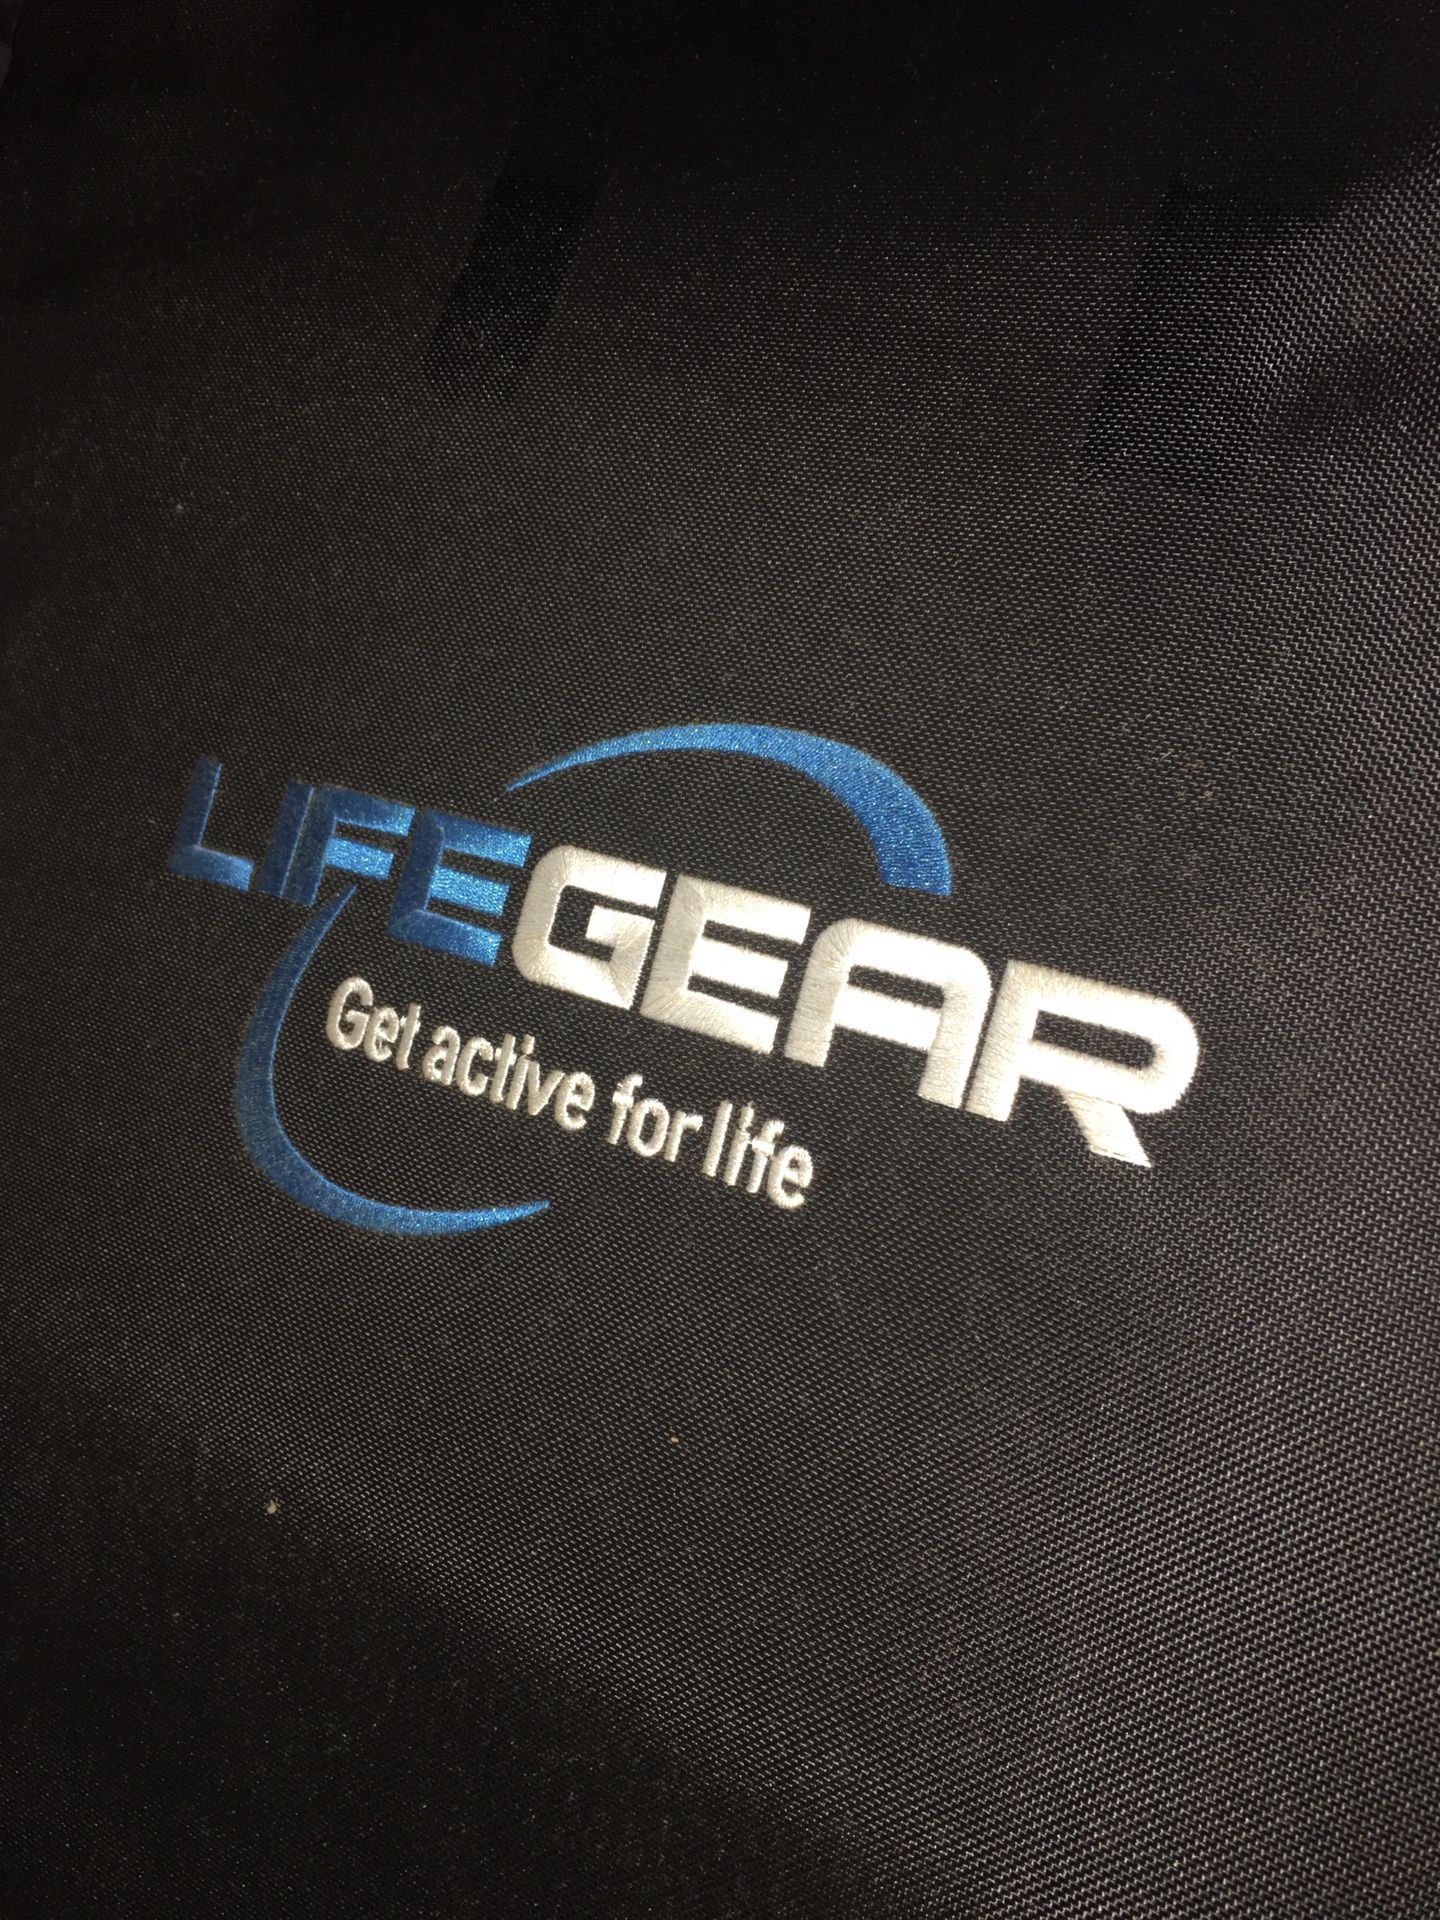 Lifegear Inversion Table Exercise Back Pain